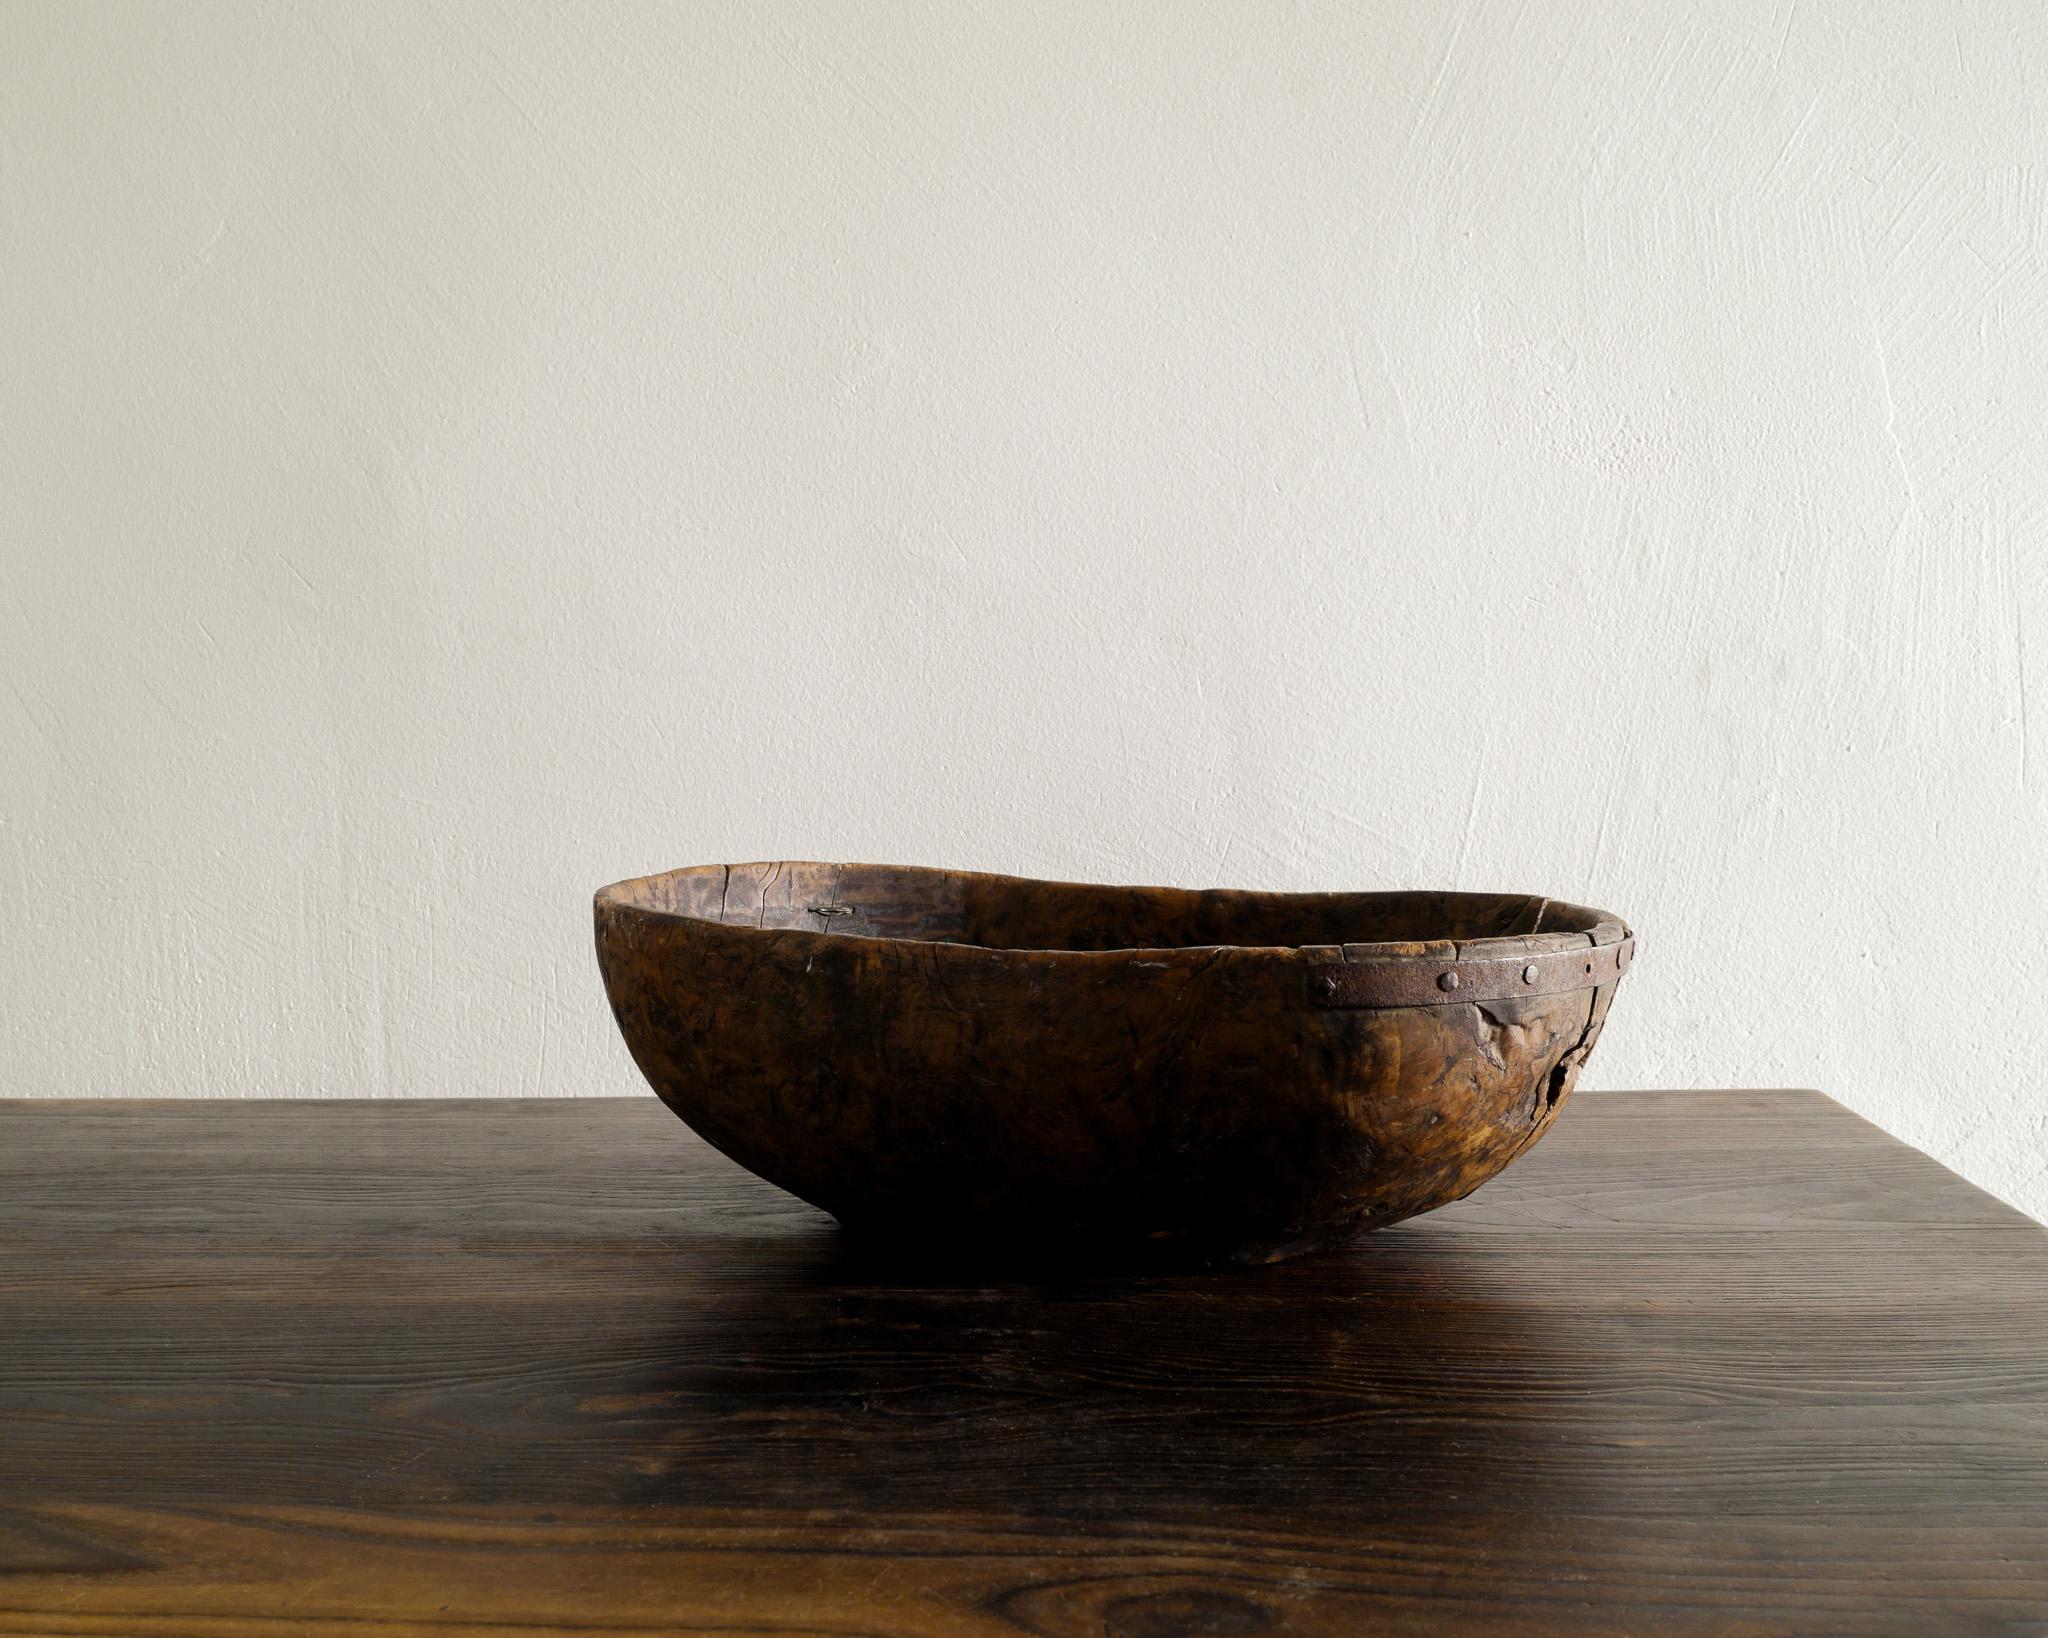 Very beautiful and decorative wooden bowl made out of birch wood produced in Sweden. Dated 1793. In a very charmy condition with some older repairs adding a lot of character. 

Dimensions: H: 13 cm / 5.1